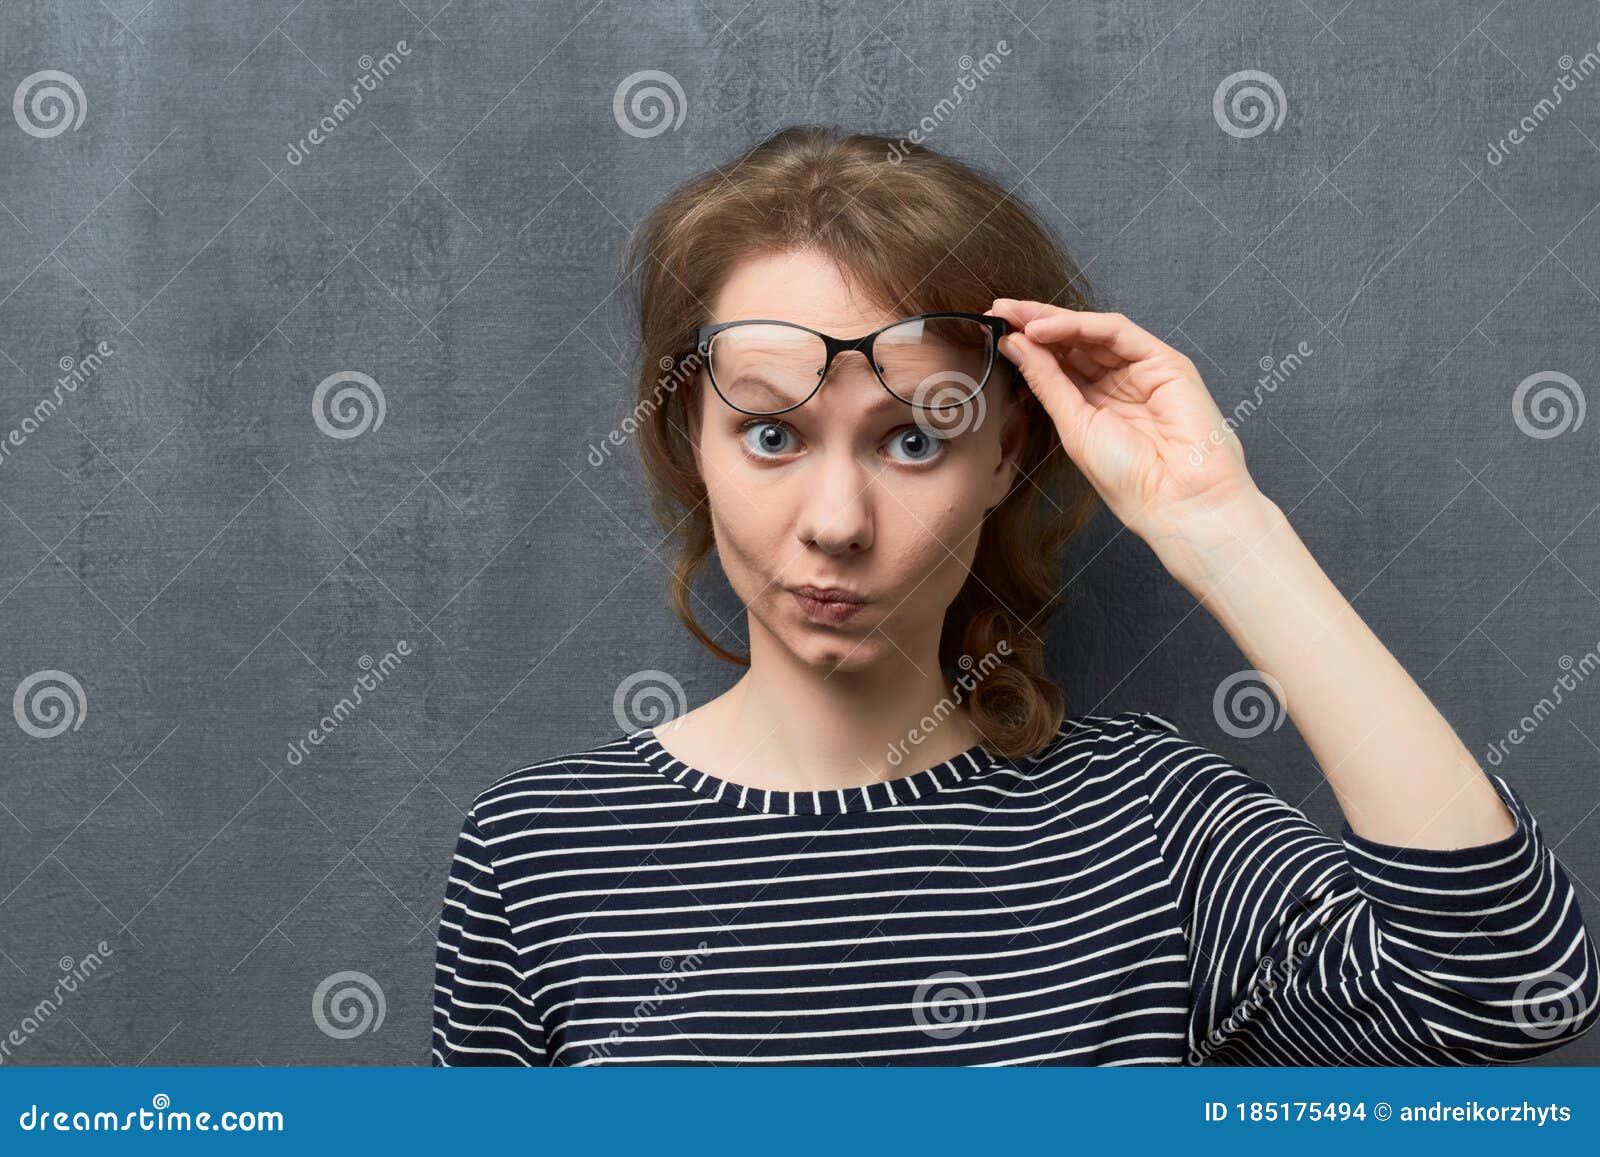 Portrait Of Surprised Girl With Glasses Stock Photo Image Of Embarrassed Background